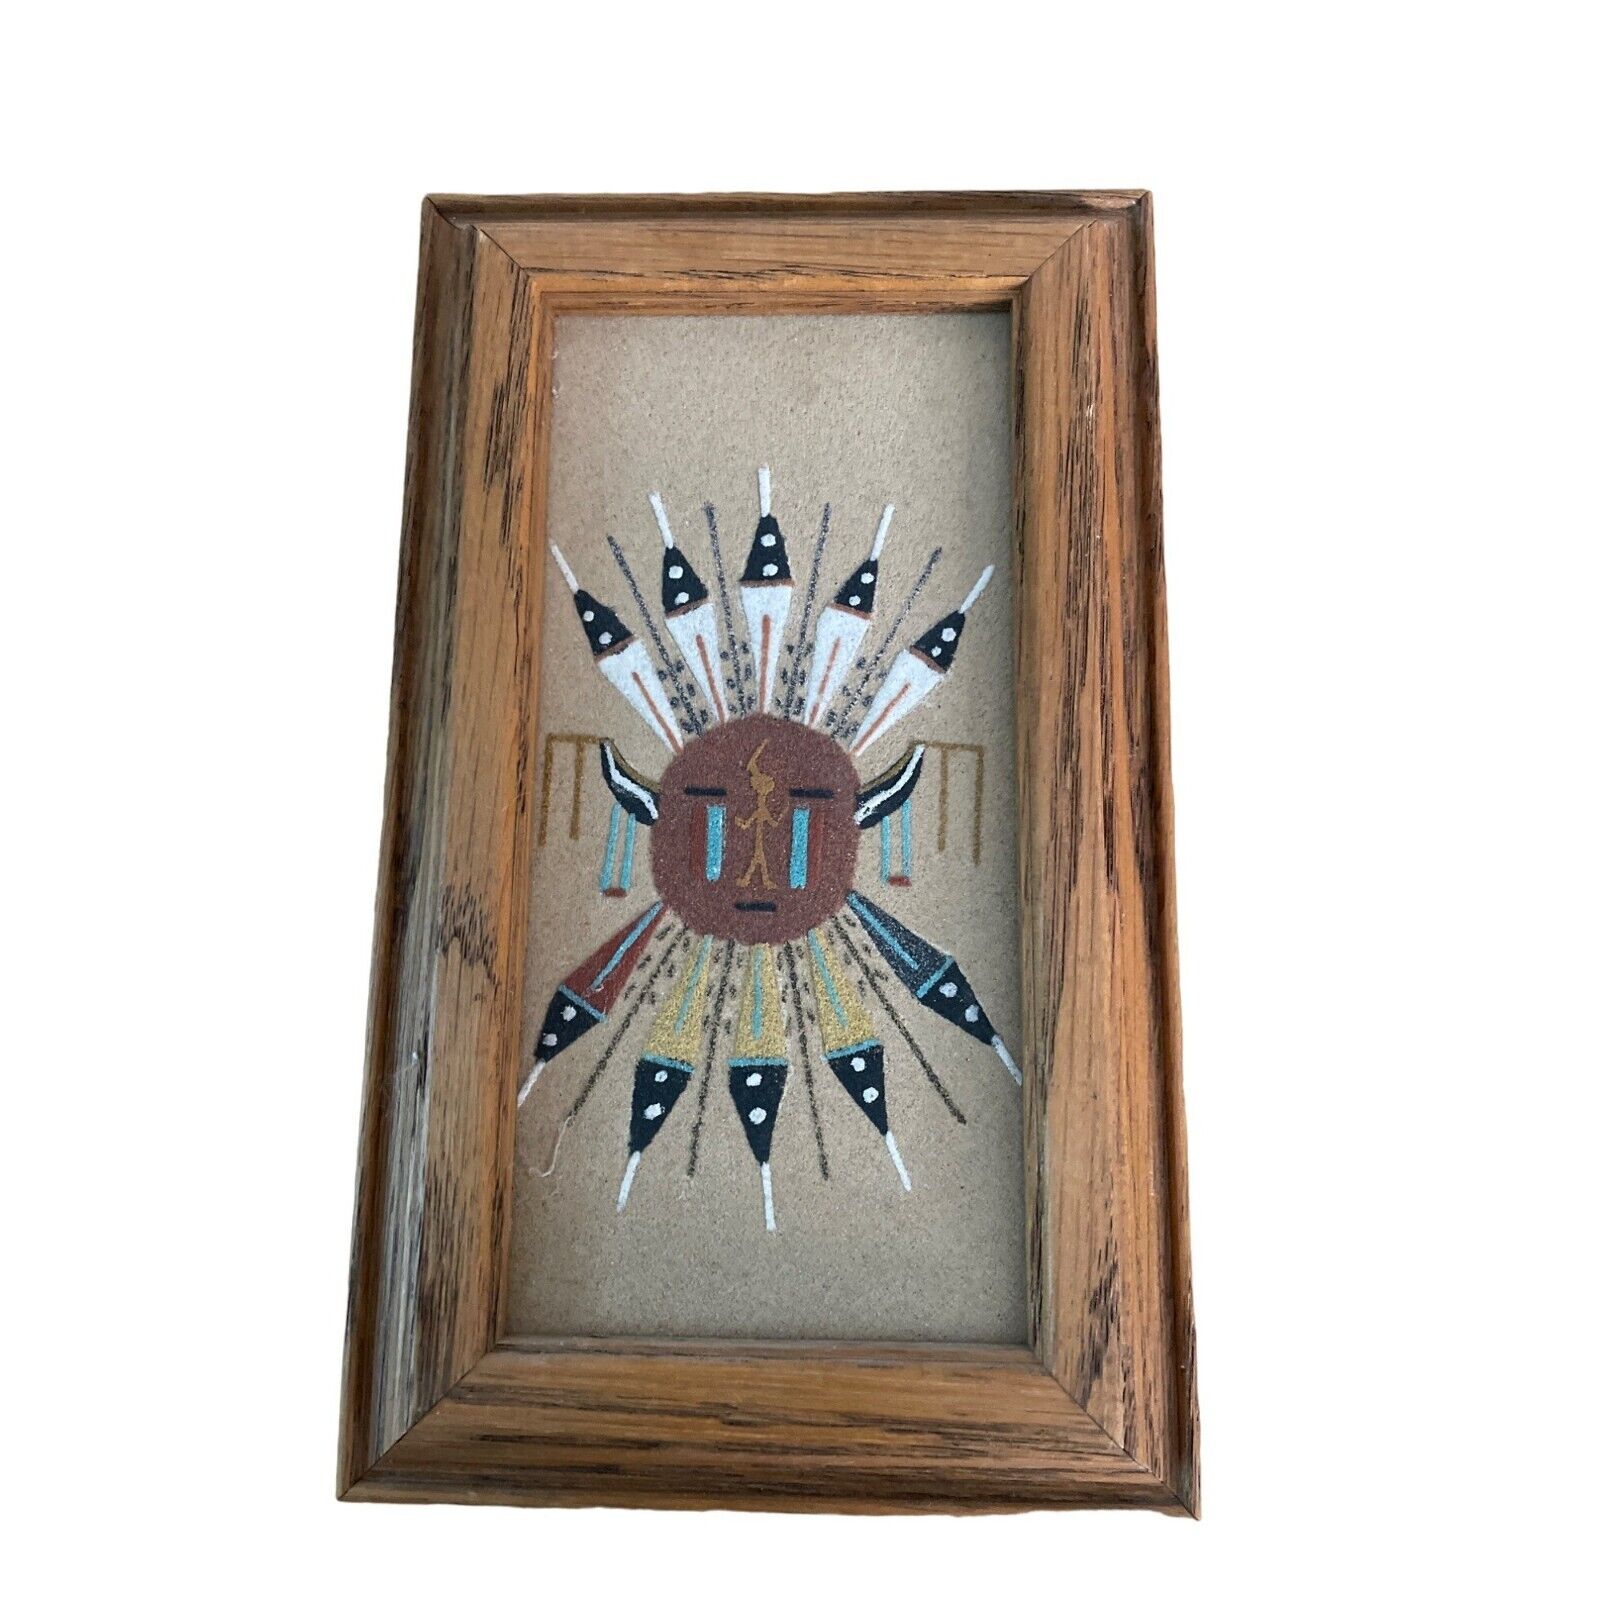 Vintage Native American Navajo Sand Painting Wall Art Wood Framed Signed 7.5x4.5